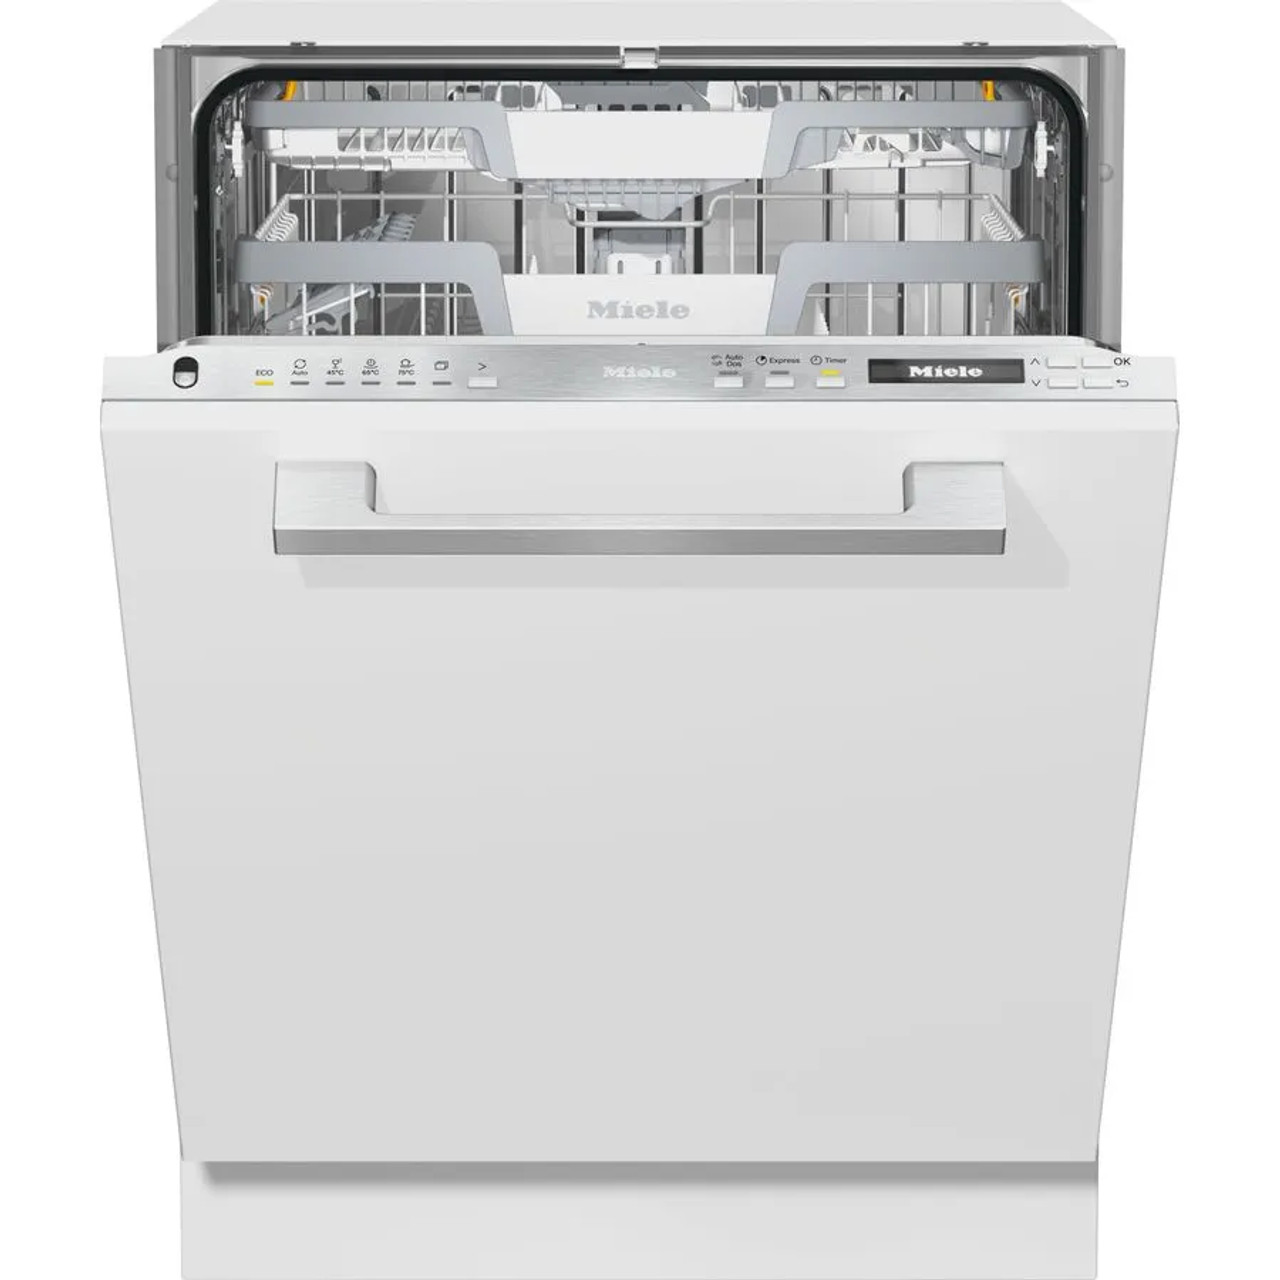 Cleansteel Fully Integrated Dishwasher With Autodos 